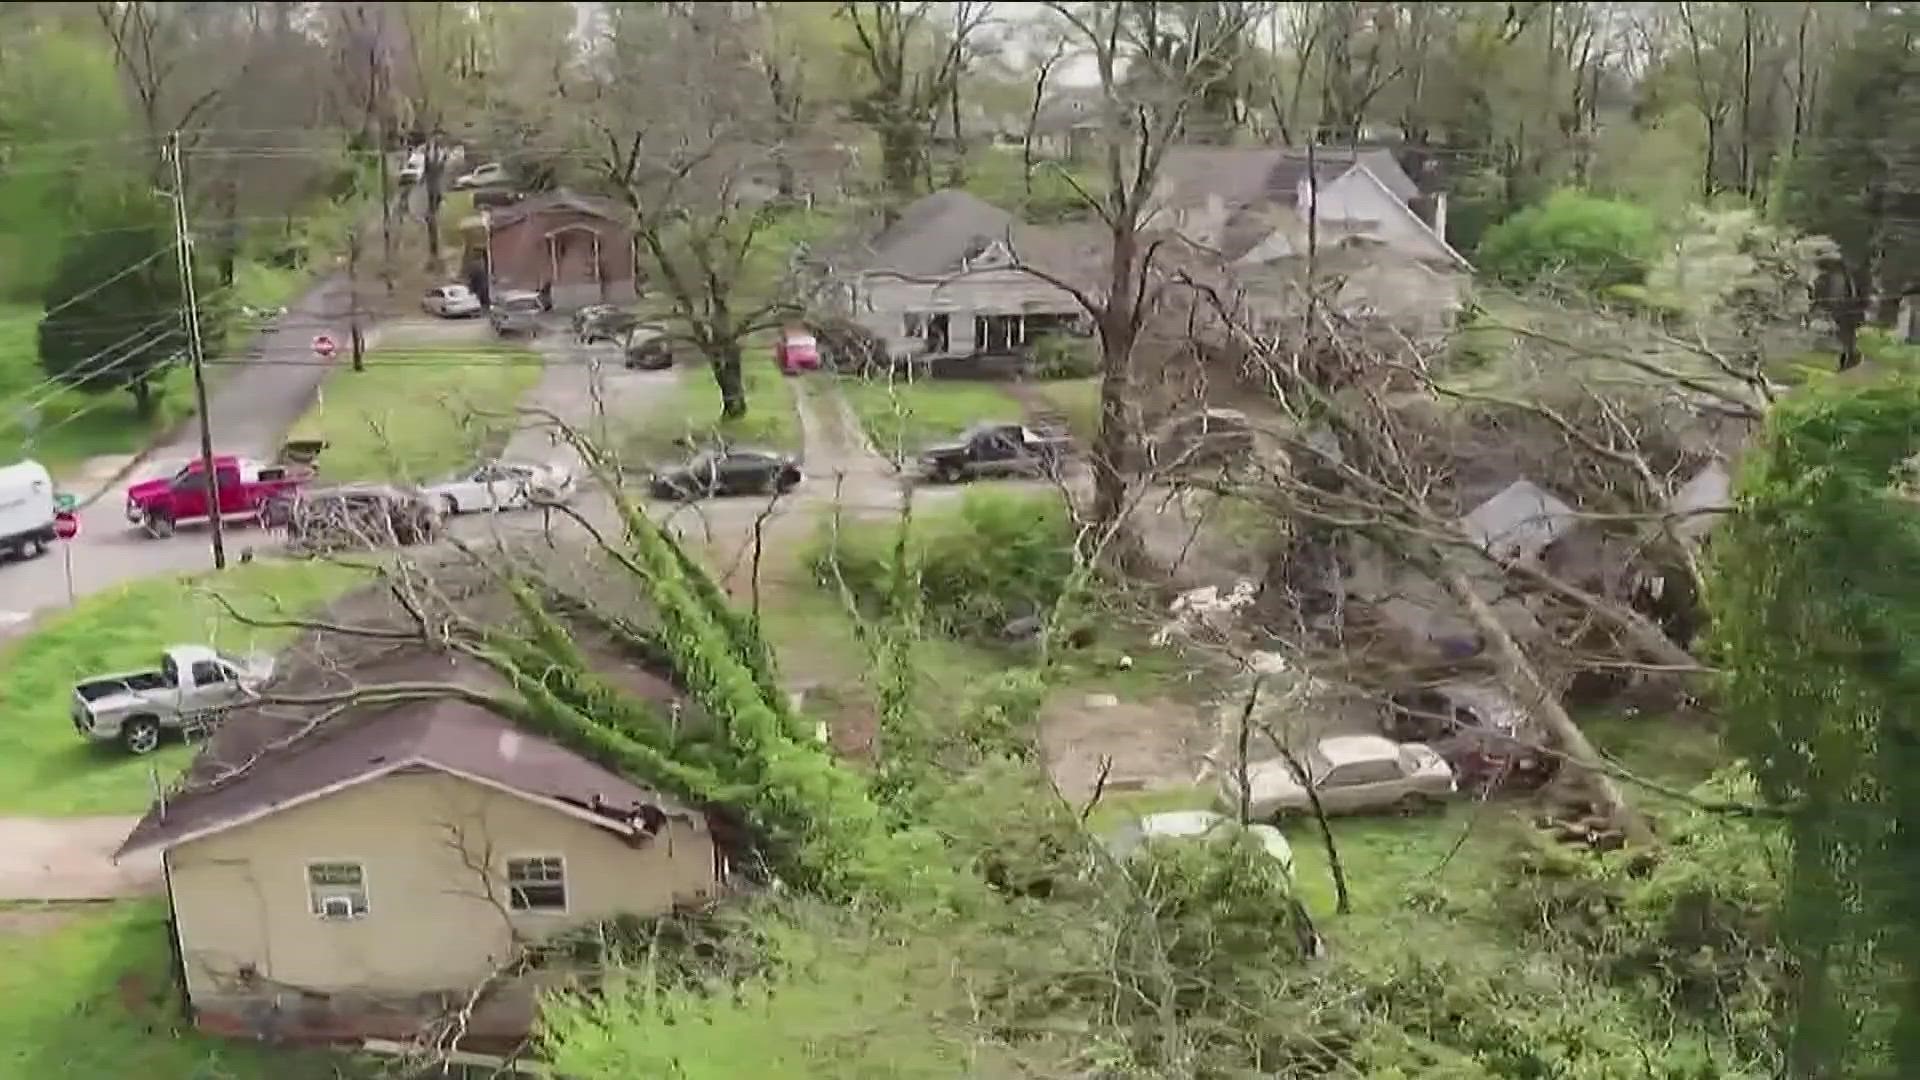 Here are some tips to consider before severe weather could hit your neighborhood.